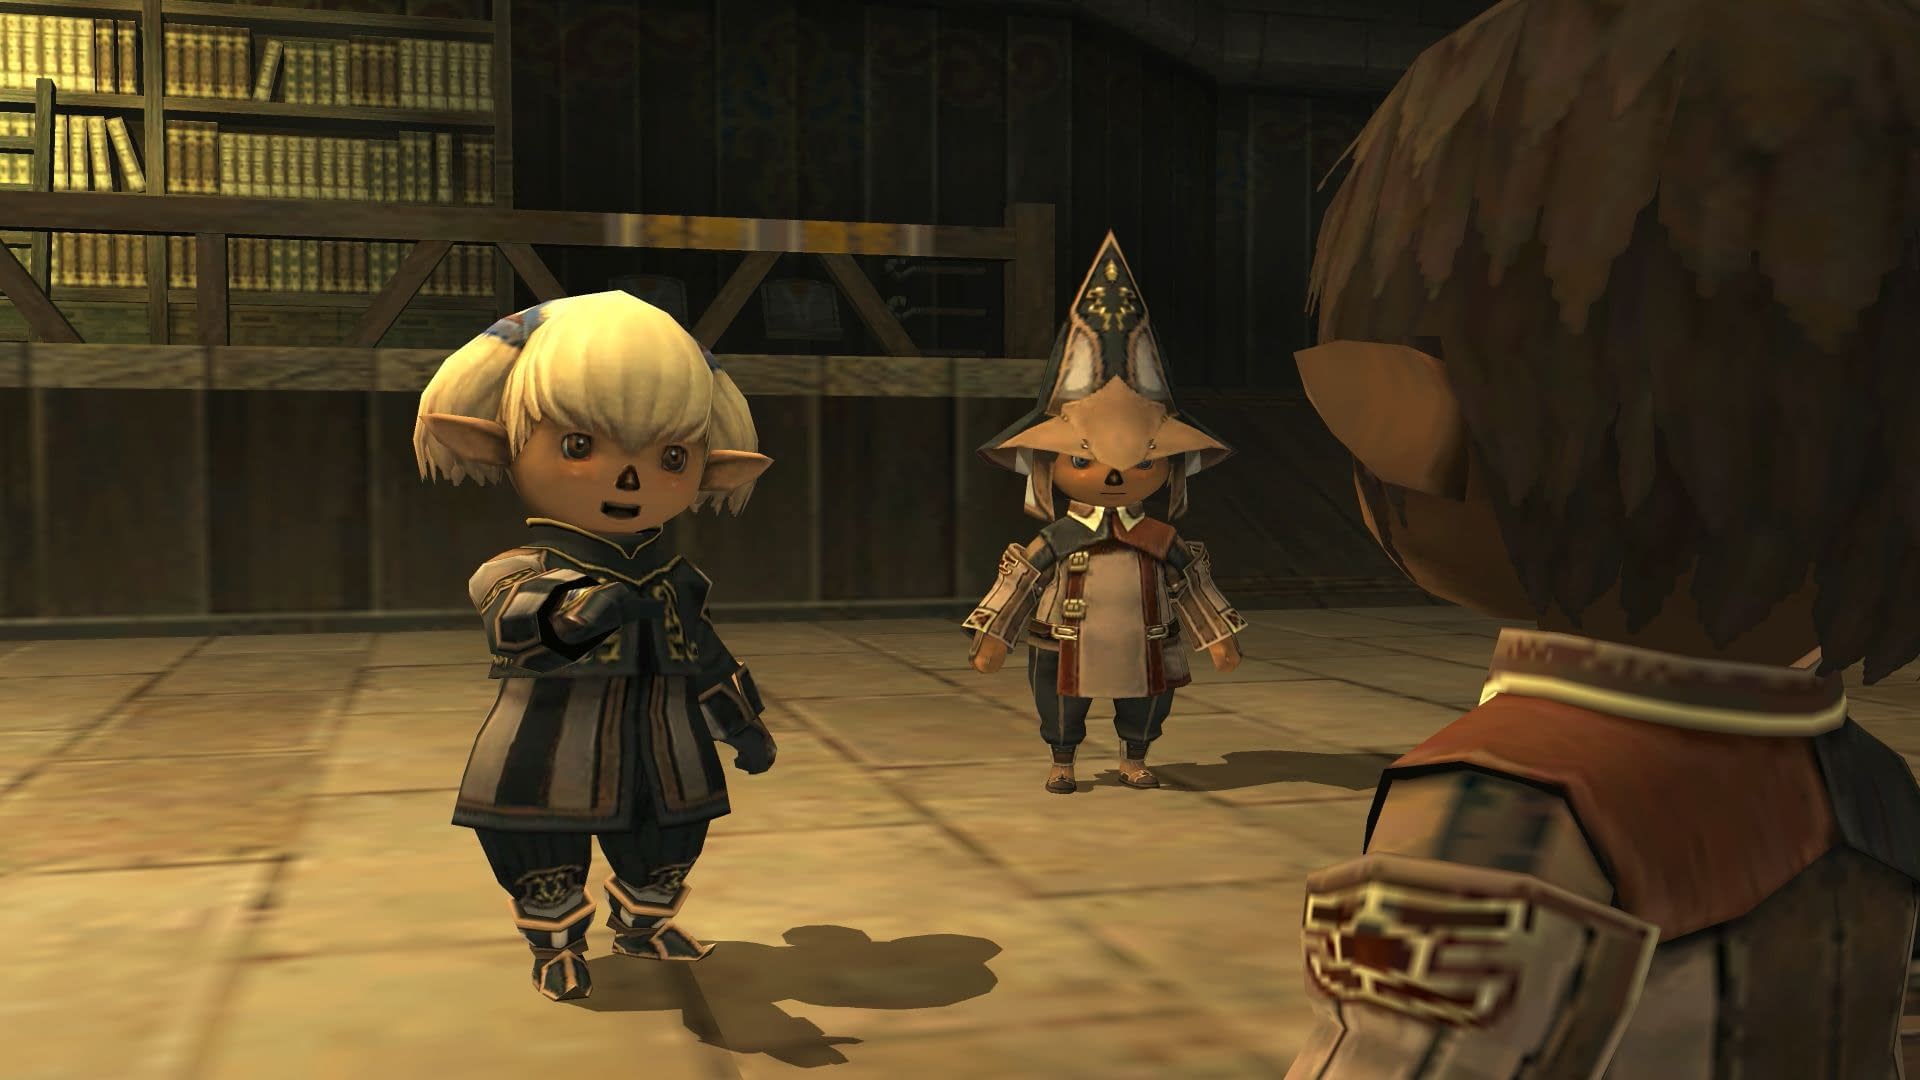 Final Fantasy XI Celebrates 20 Years With a New Update, Website, and More